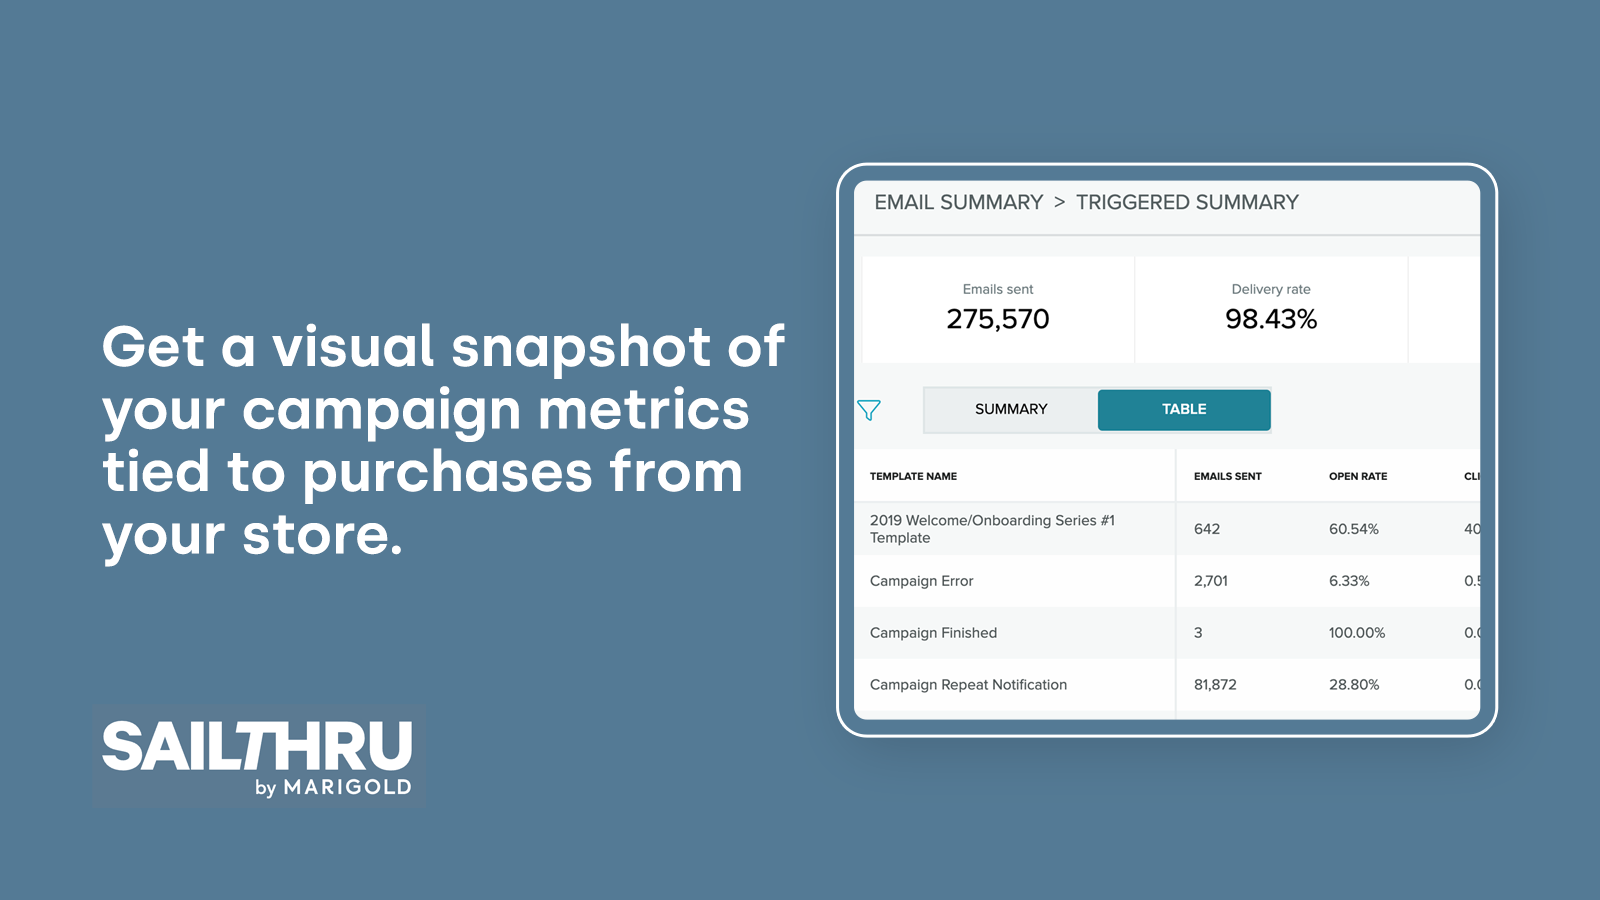 Get a visual snapshot of your campaign metrics.